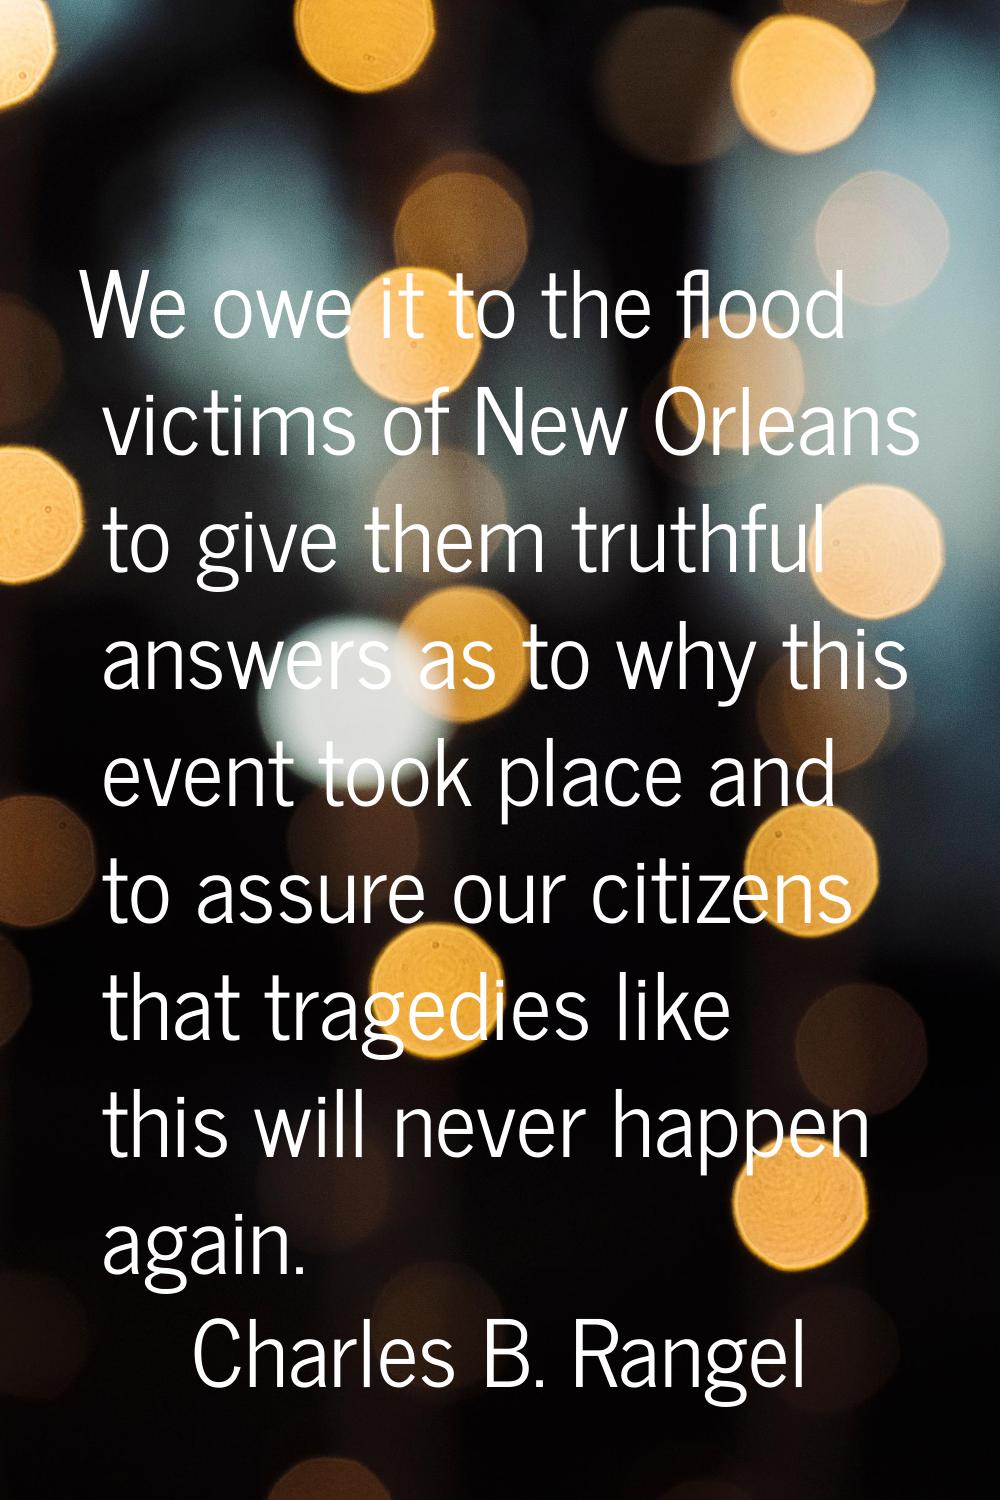 We owe it to the flood victims of New Orleans to give them truthful answers as to why this event to